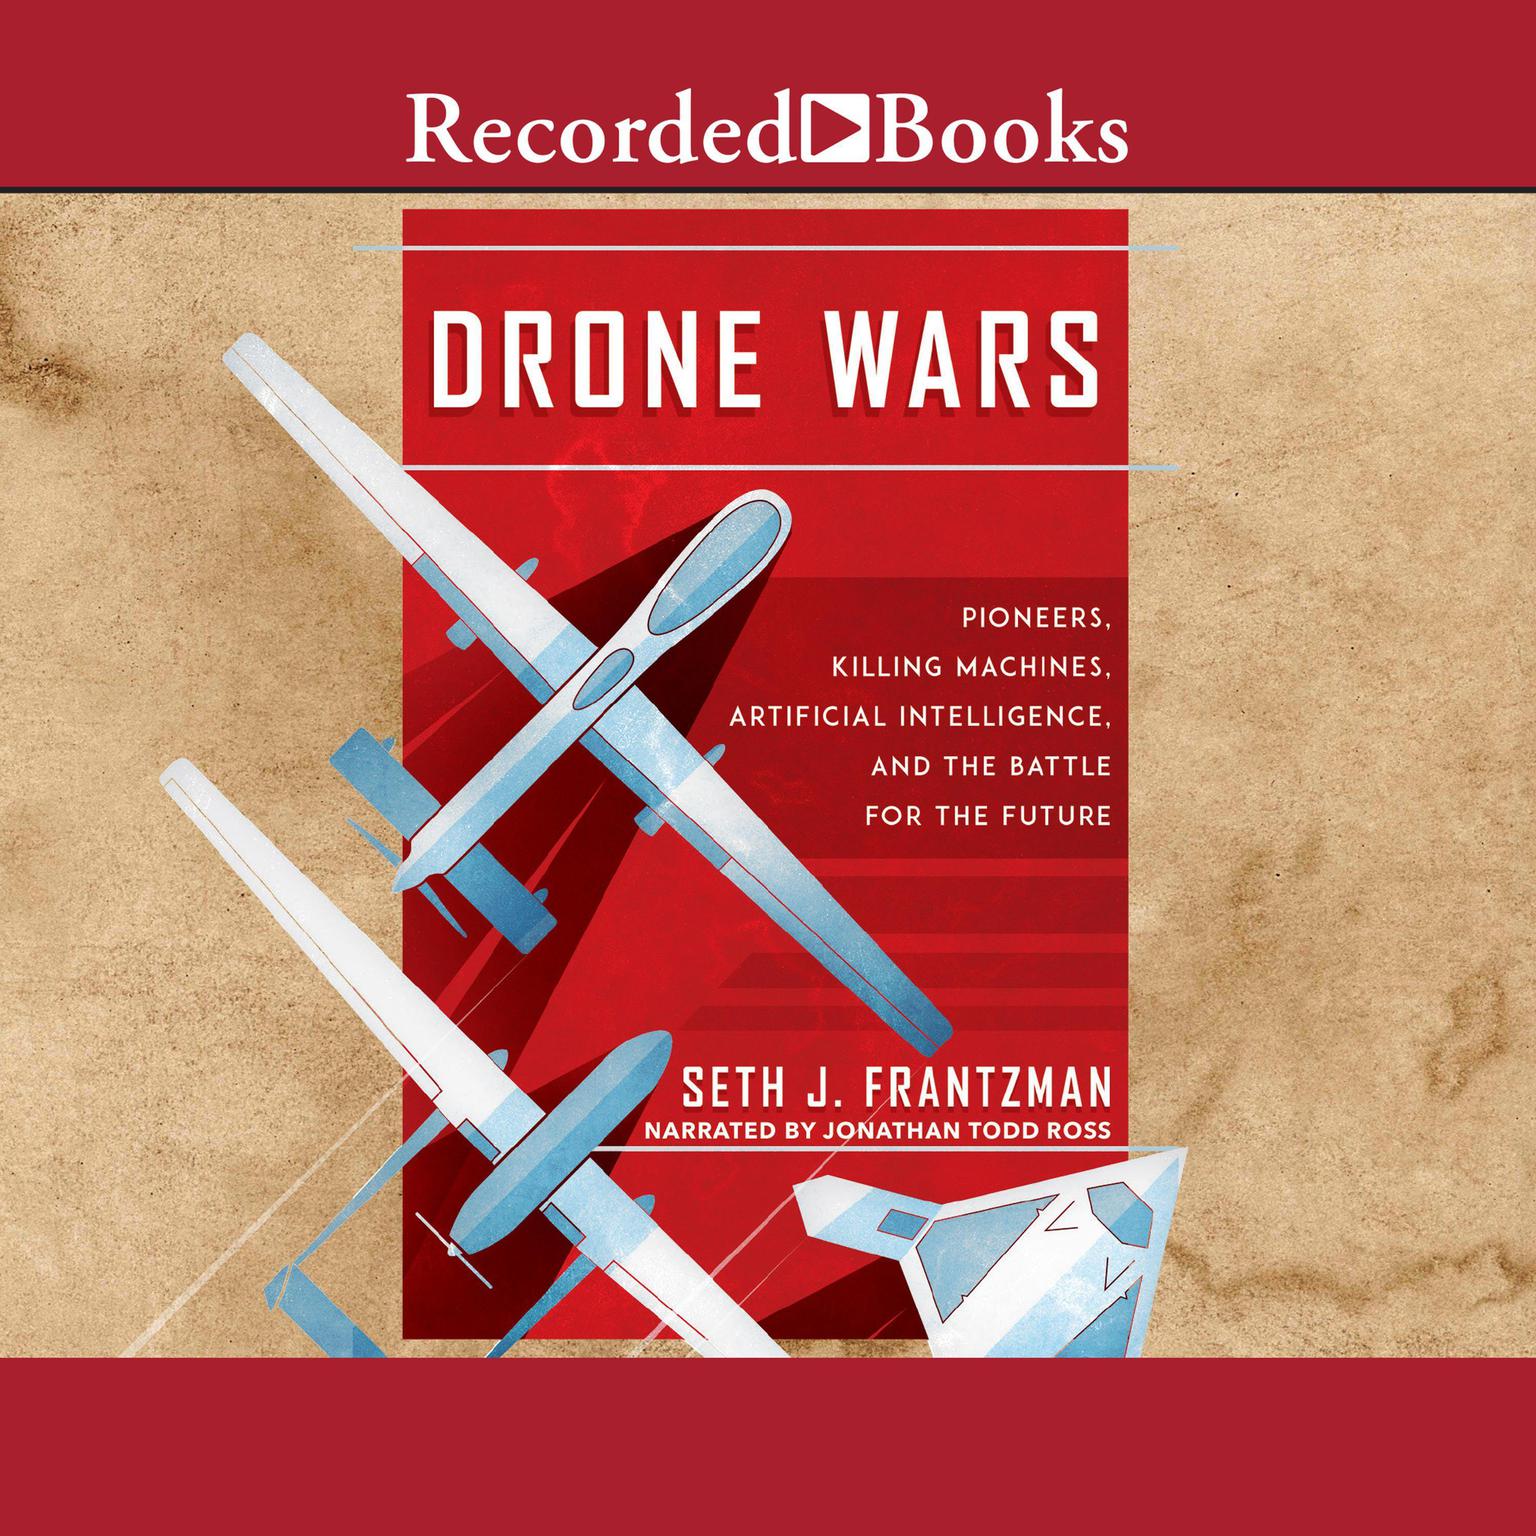 Drone Wars: Pioneers, Killing Machines, Artificial Intelligence, and the Battle for the Future Audiobook, by Seth J. Frantzman